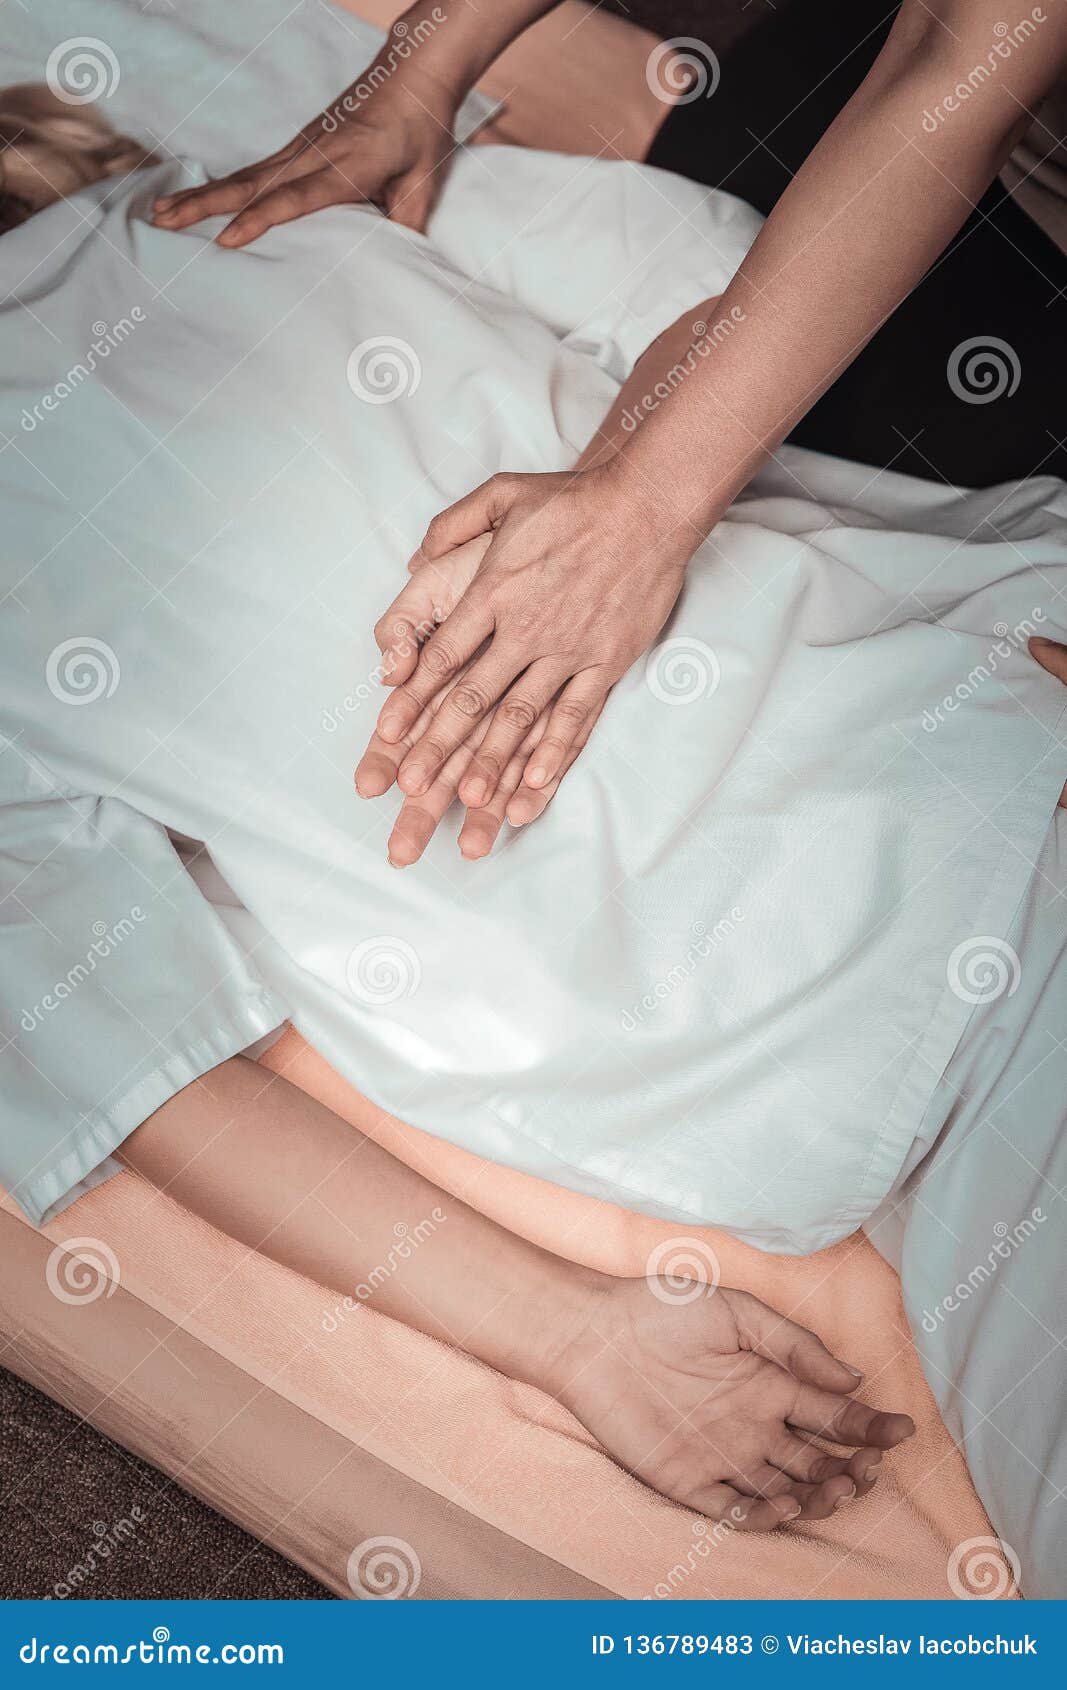 Hands Of Skilled Experienced Masseuses During The Massage